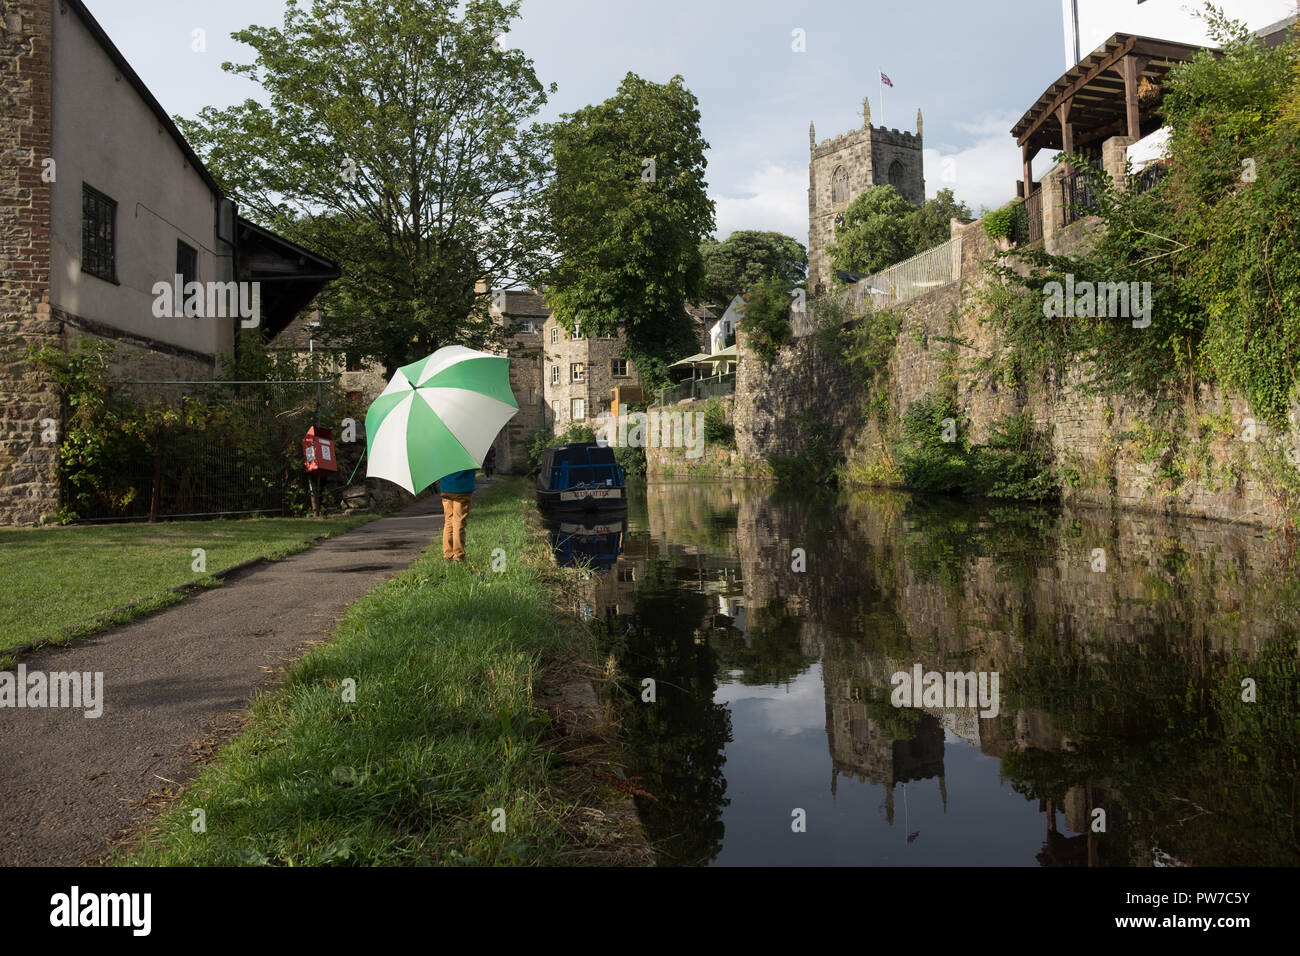 Child with umbrella standing next to the Leeds Liverpool canal in Skipton, England. Stock Photo